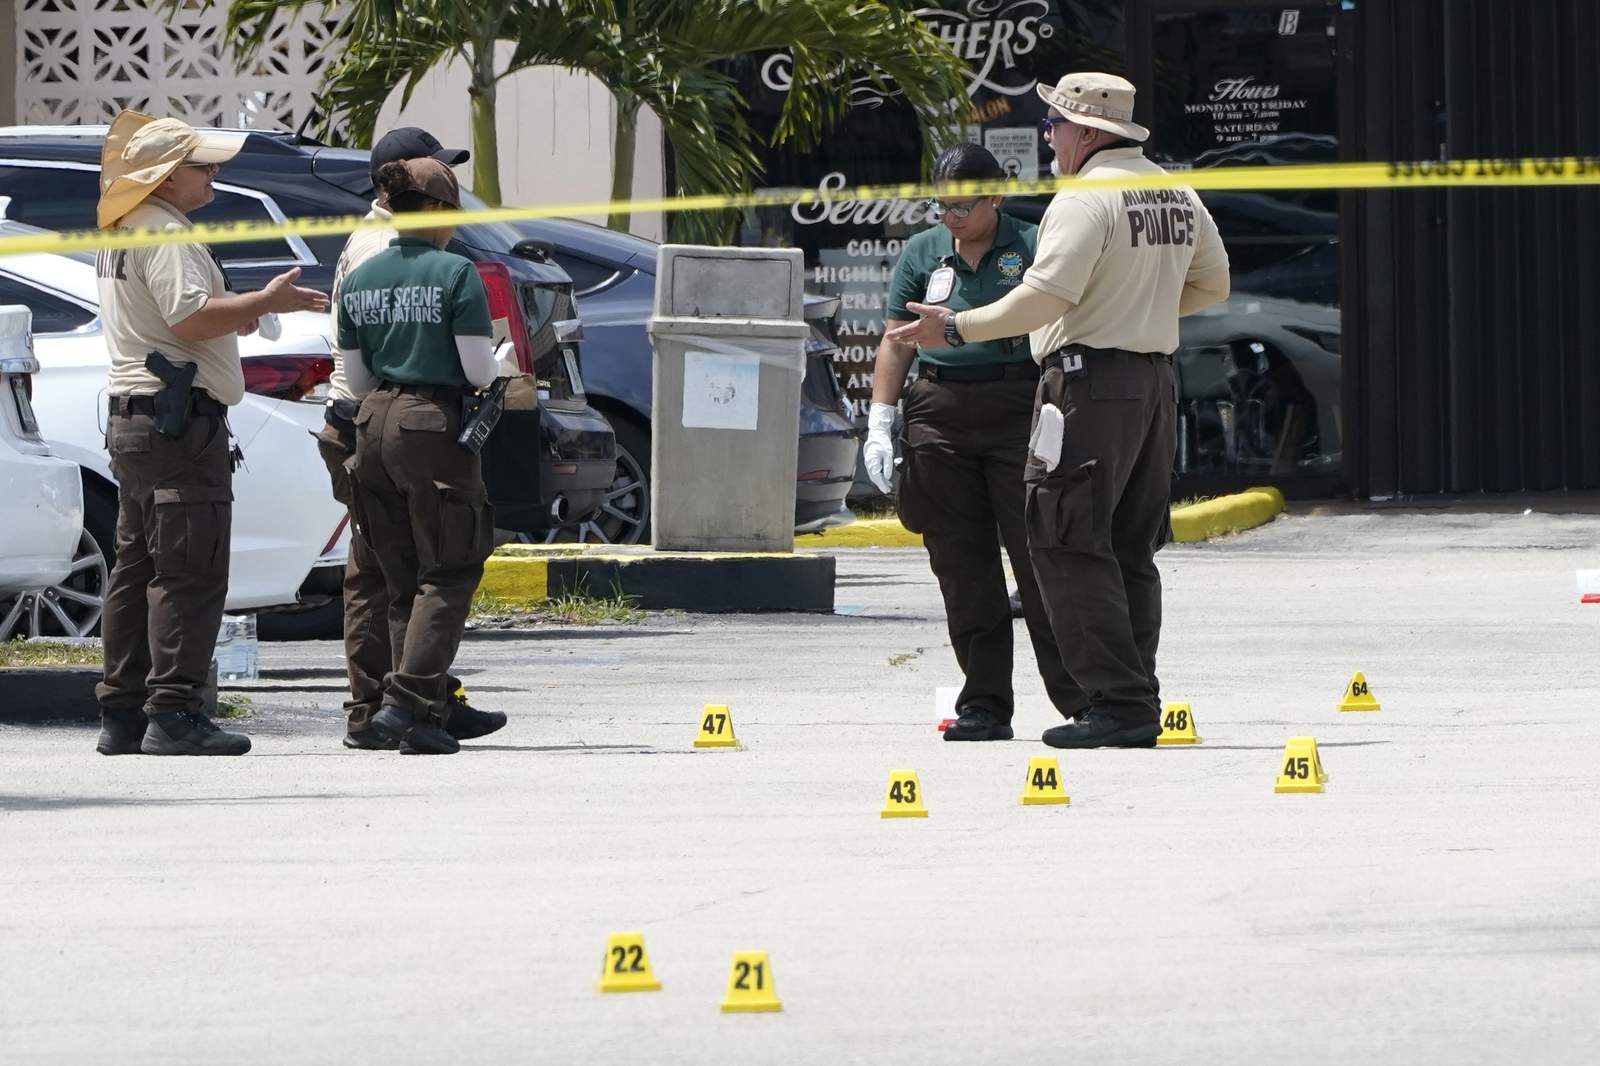 Law enforcement officials work the scene of a shooting outside a banquet hall, Sunday, in Miami-Dade County. (AP Photo/Lynne Sladky)